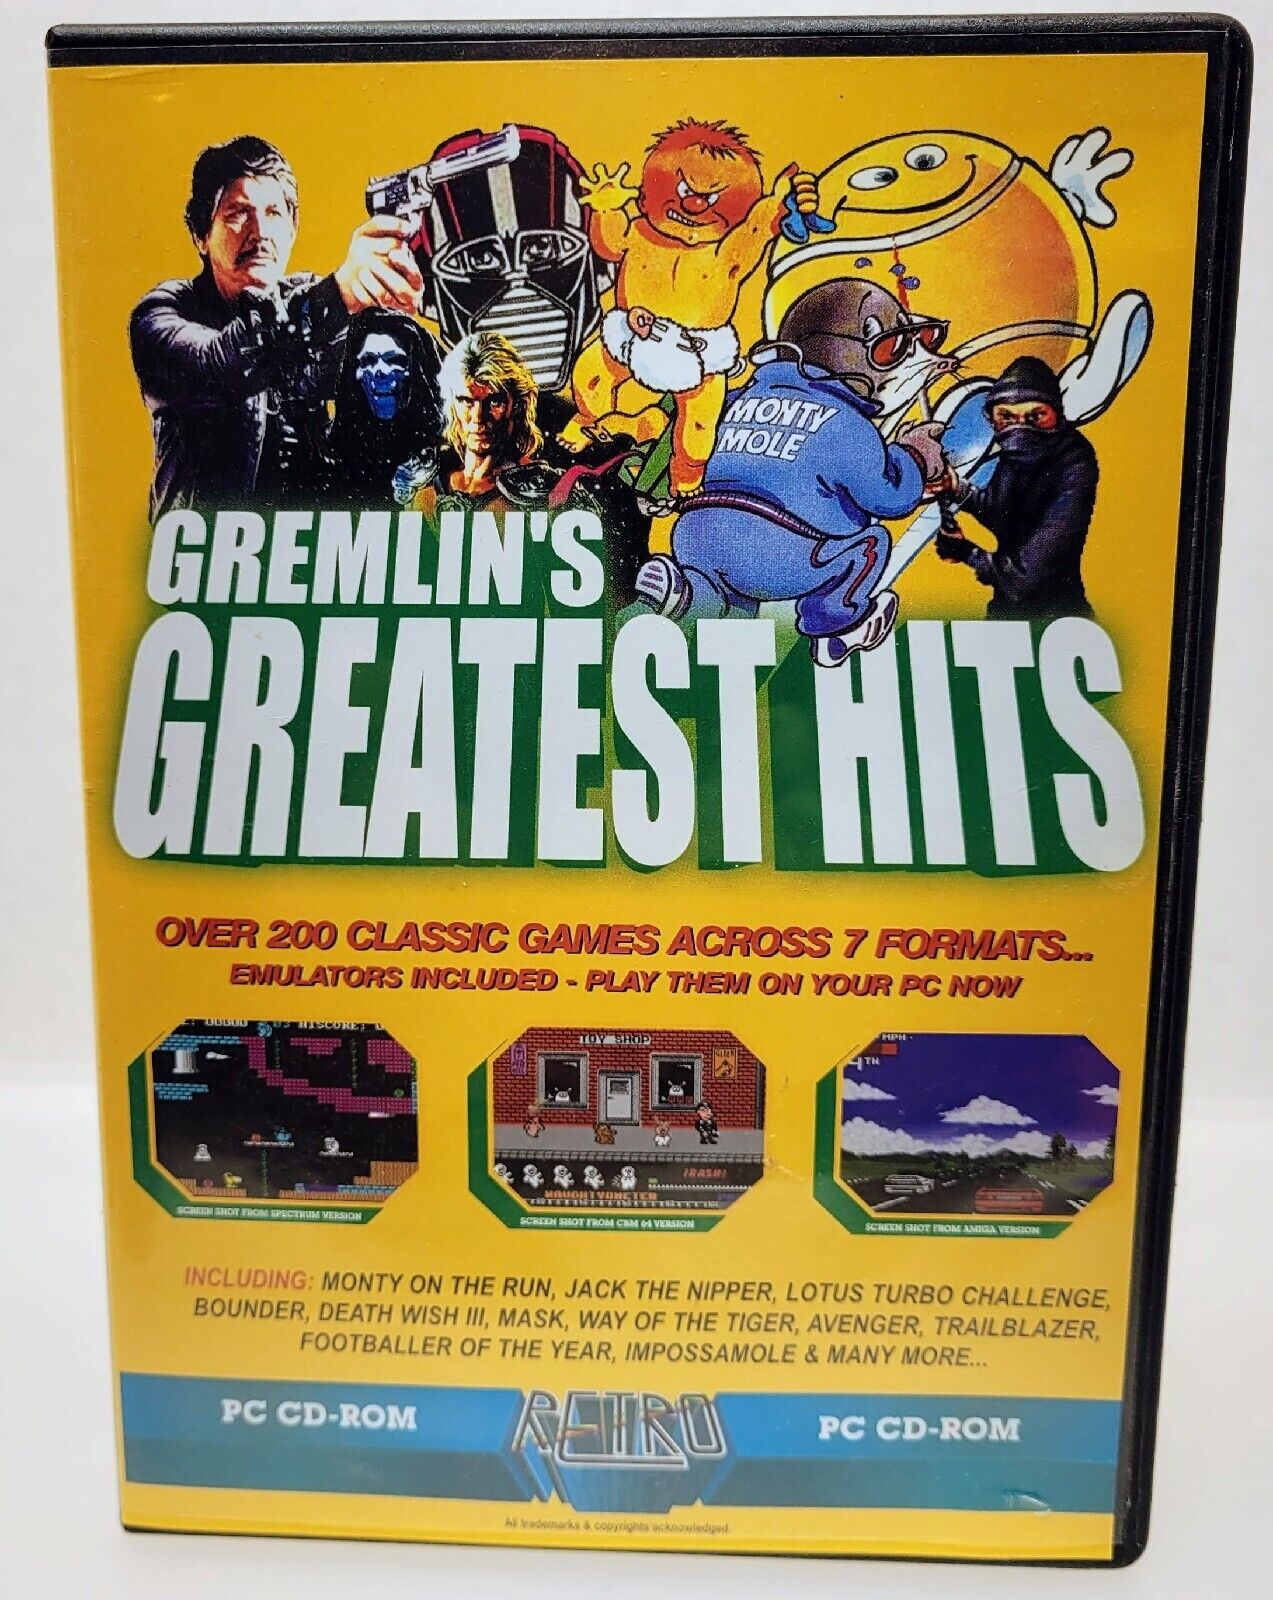 Retro Gamer Issue 3: Gremlin's Greatest Hits PC CD-ROM over 200 classic games